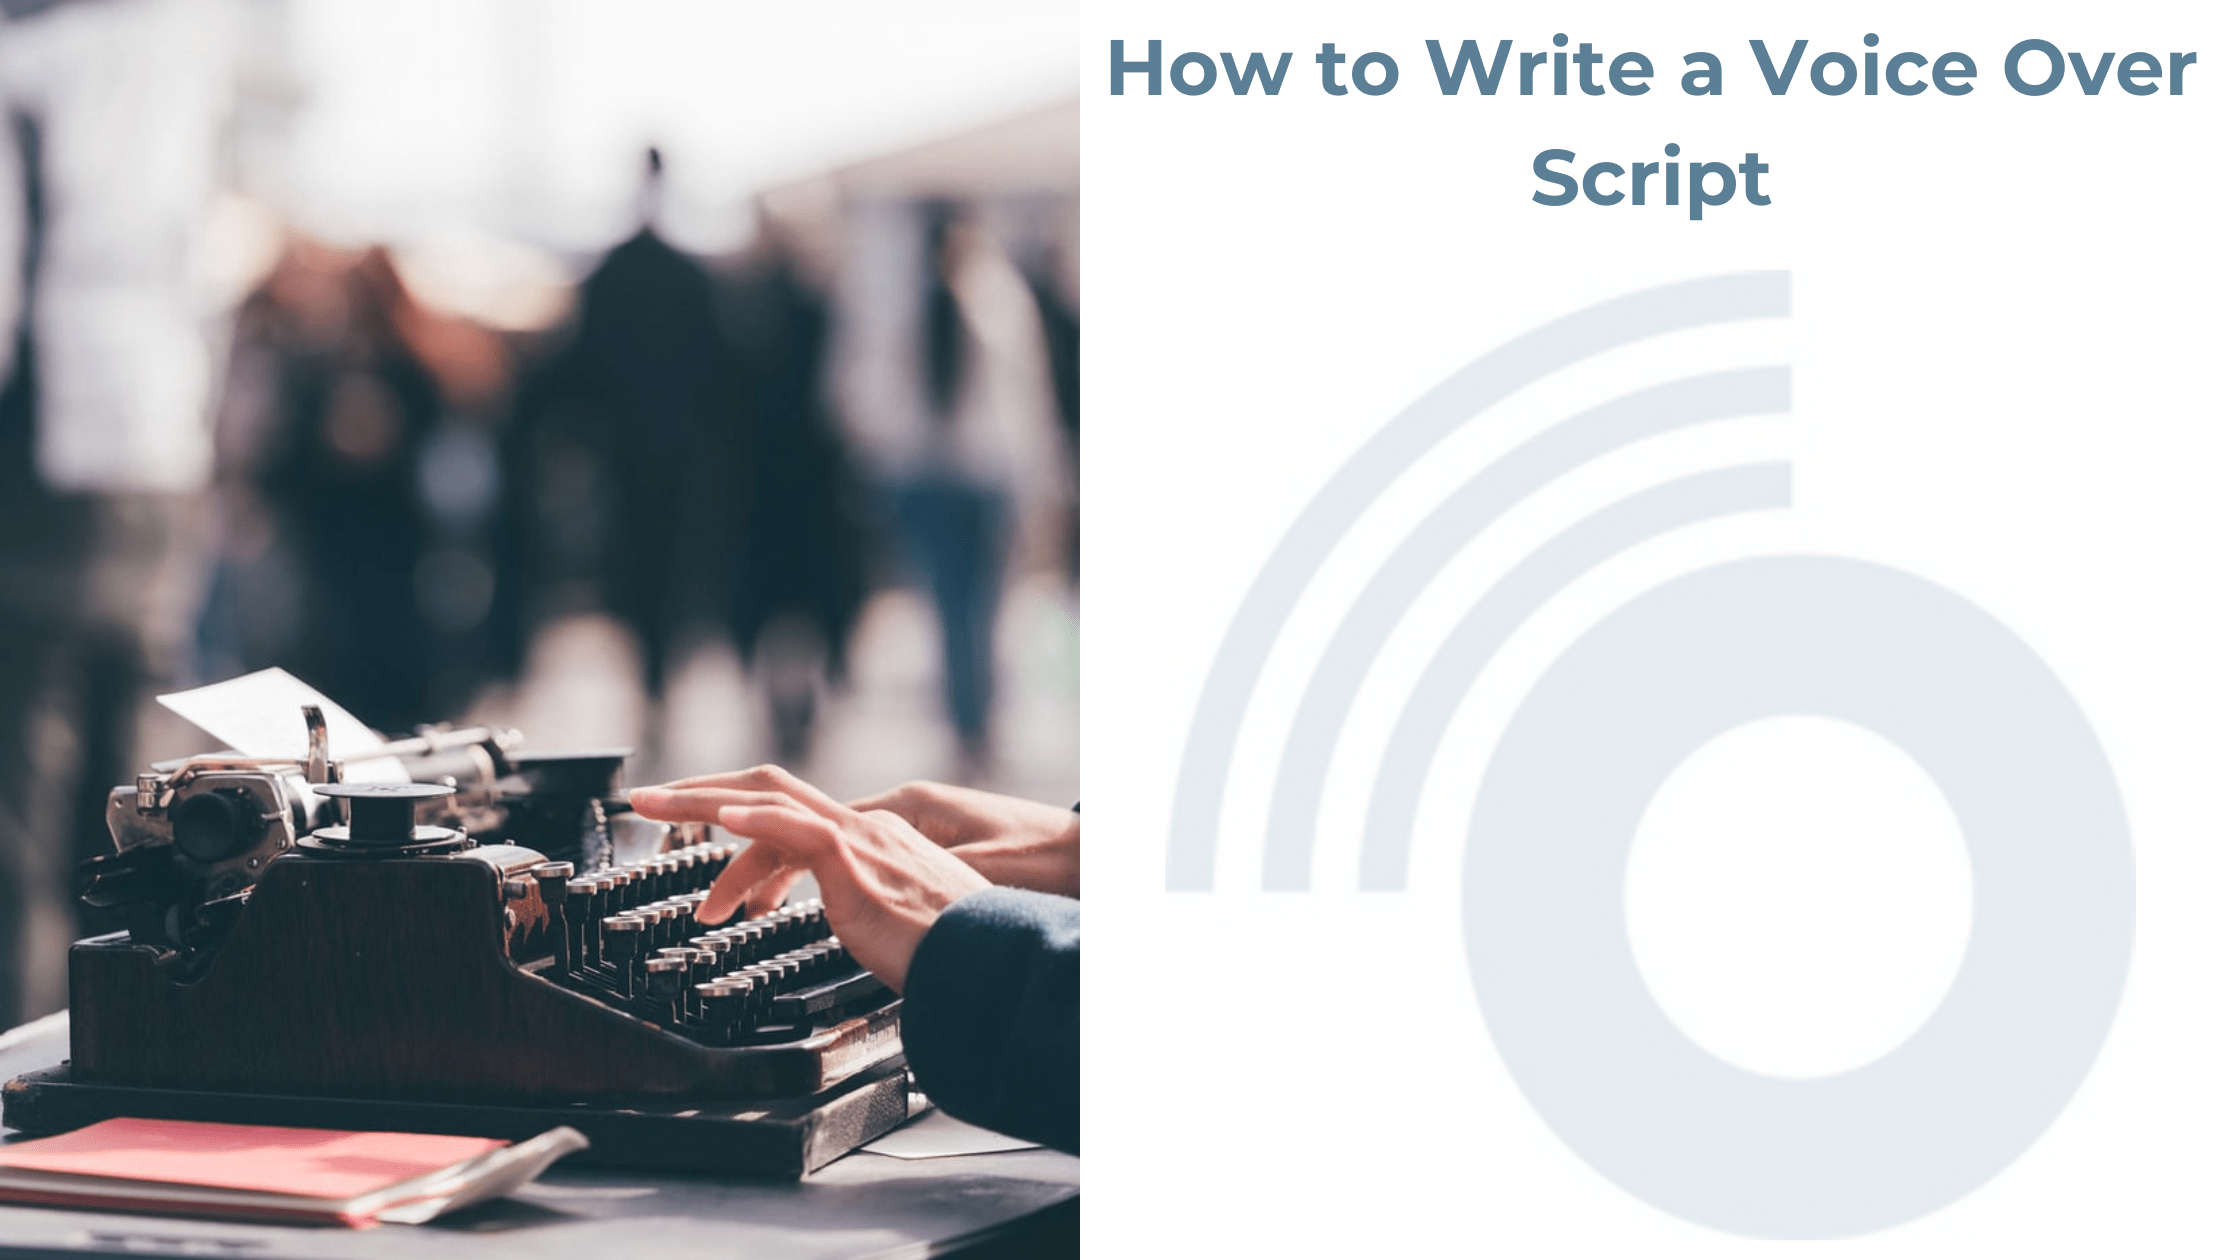 How to Write a Voice Over Script